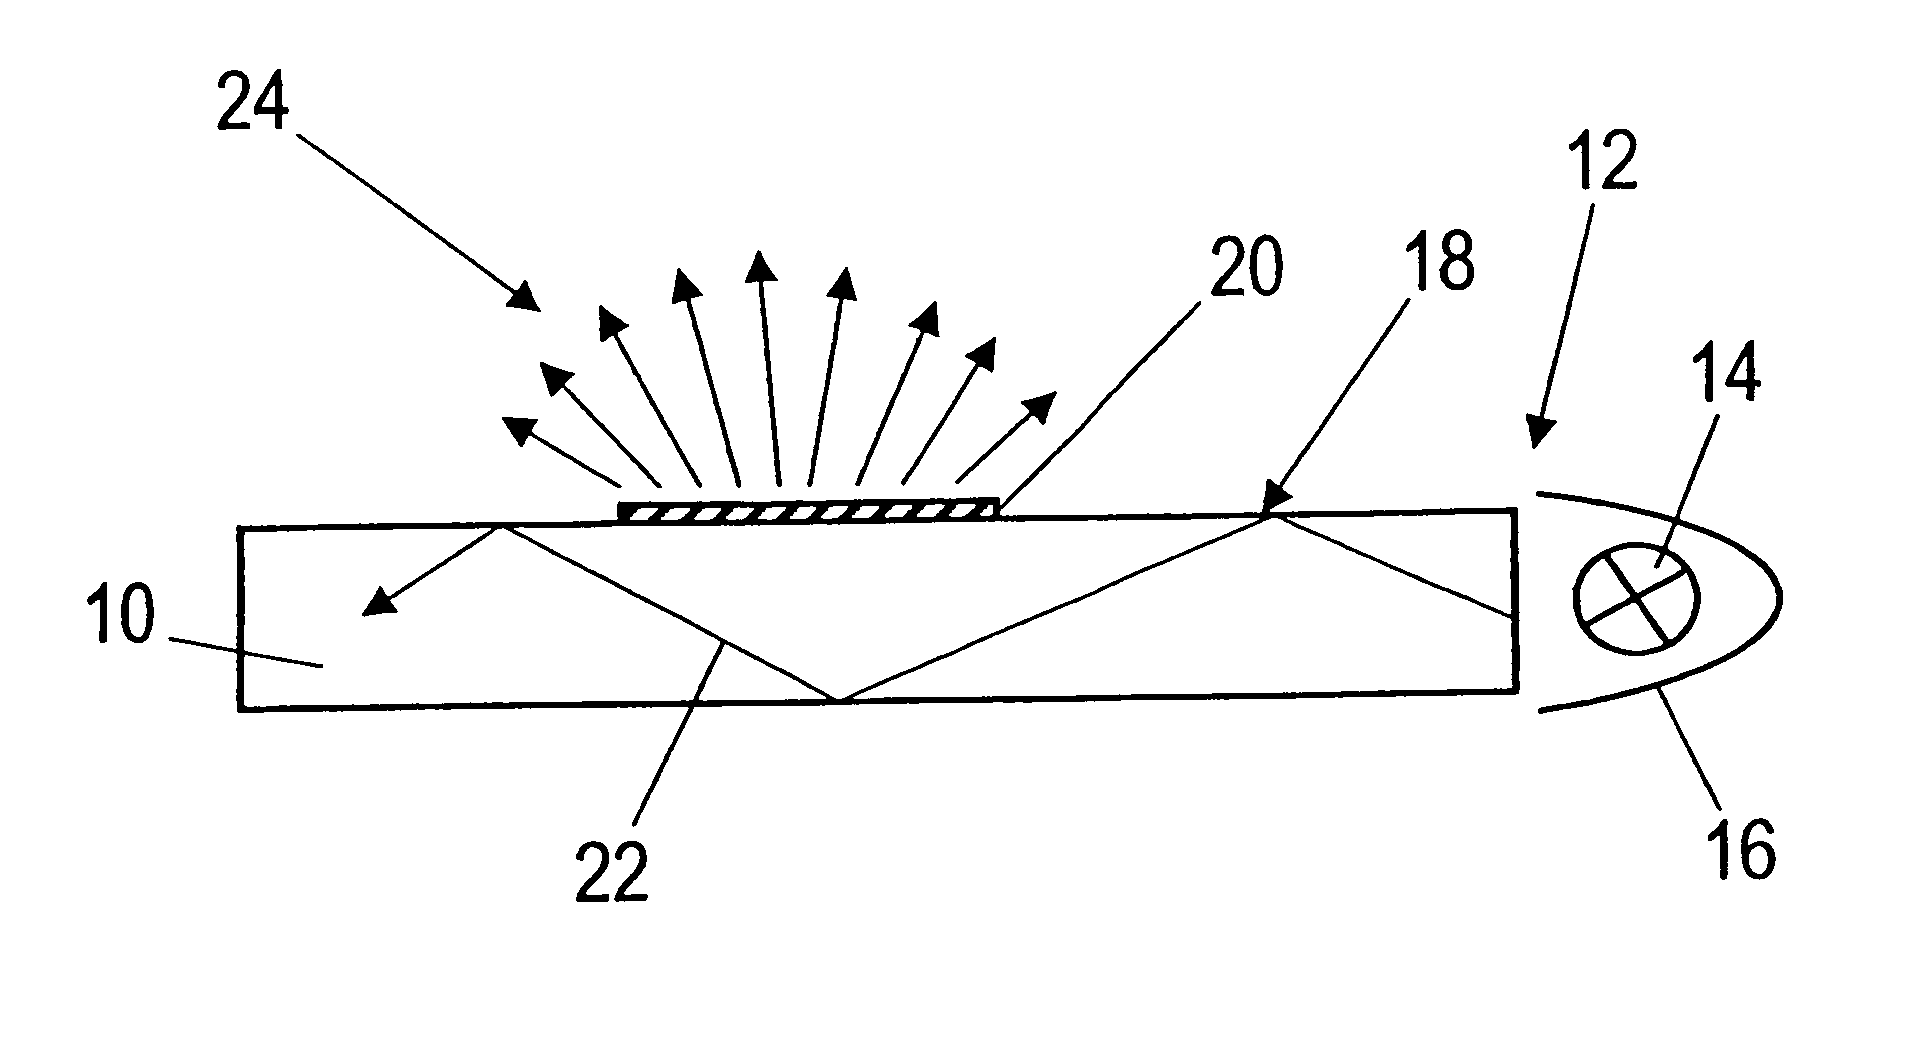 Method for producing light-scattering structures on flat optical waveguides